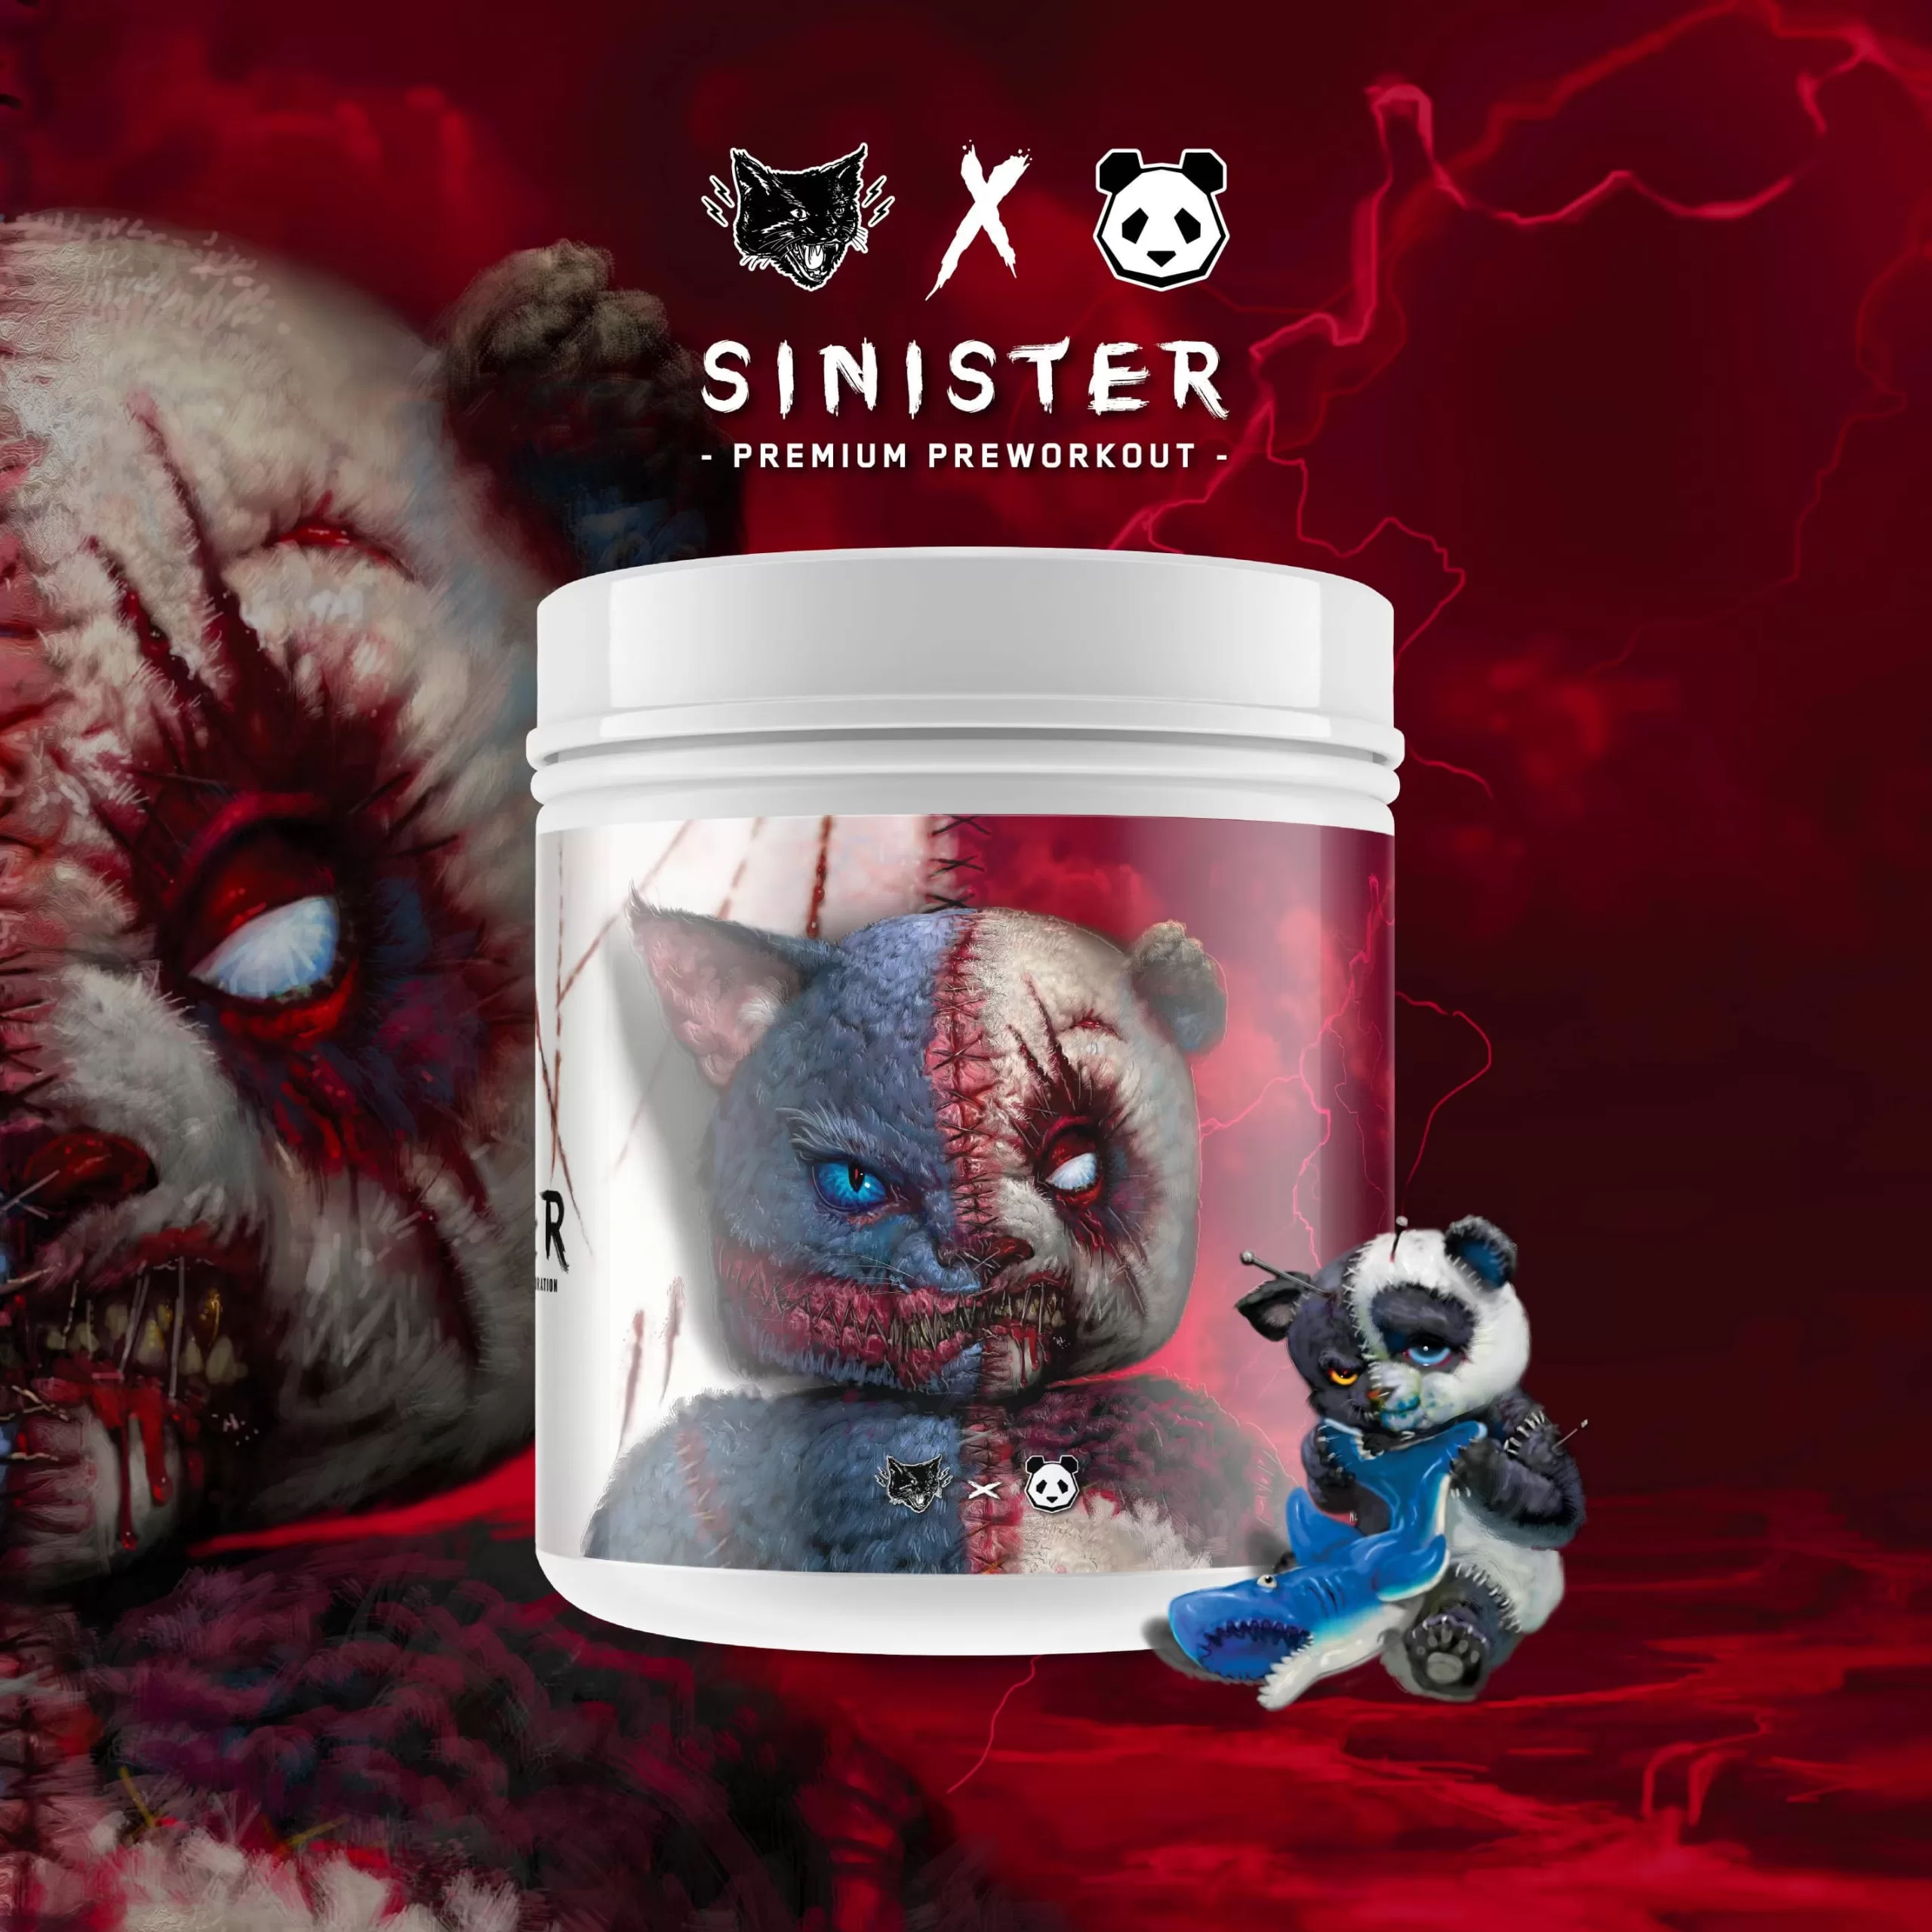 Sinister Pre Workout